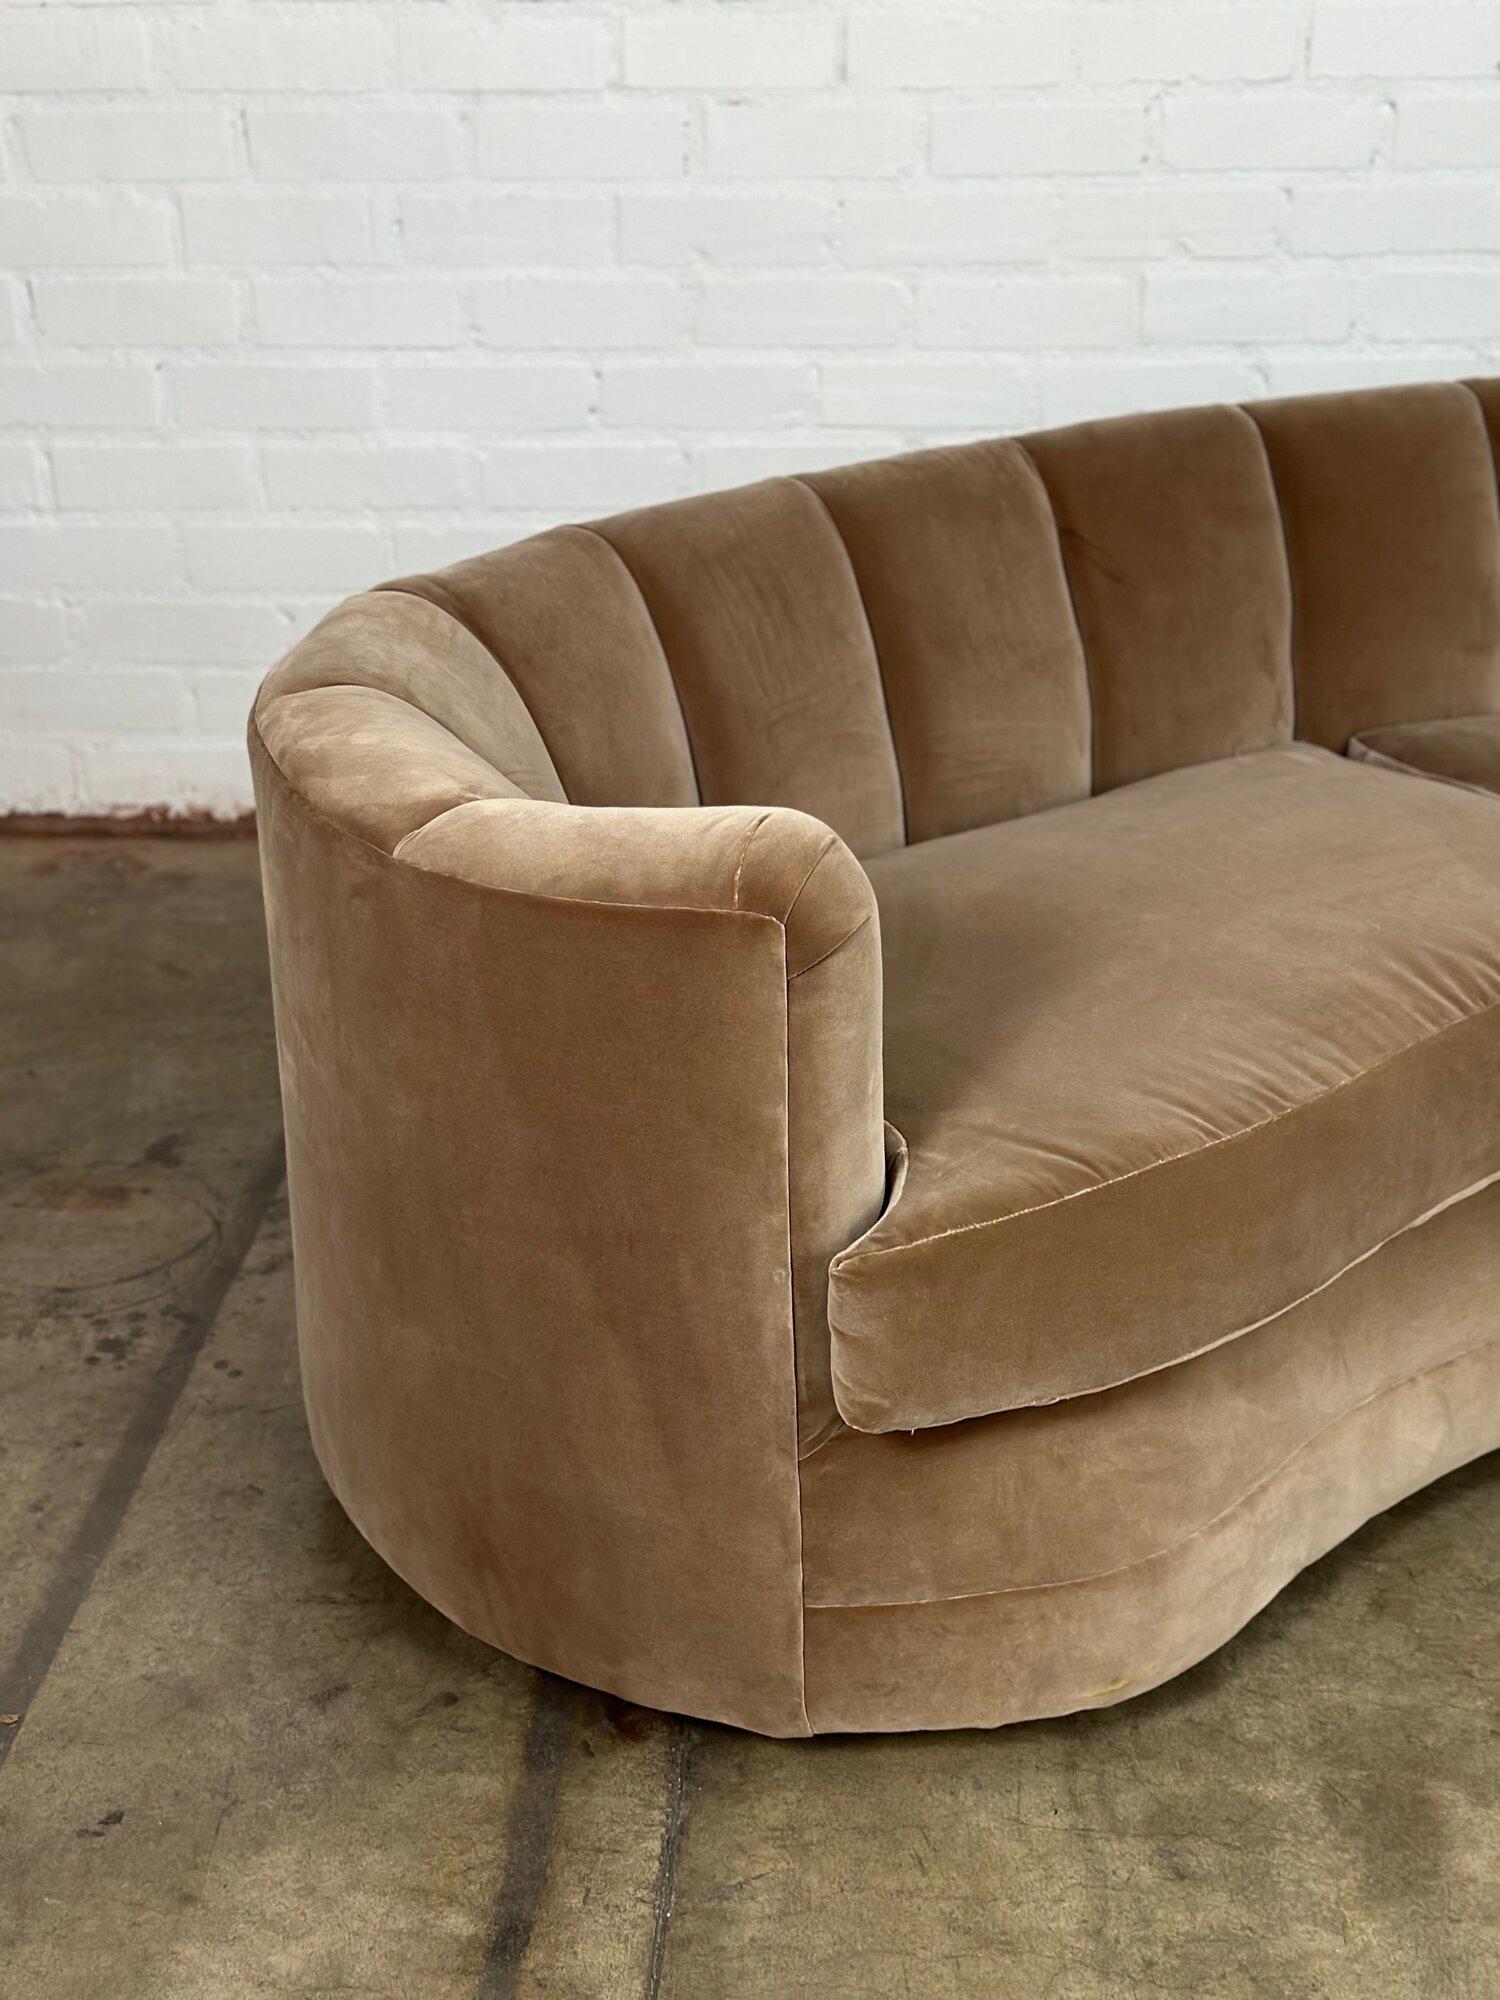 American Art Deco Kidney Sofa with Channel Back